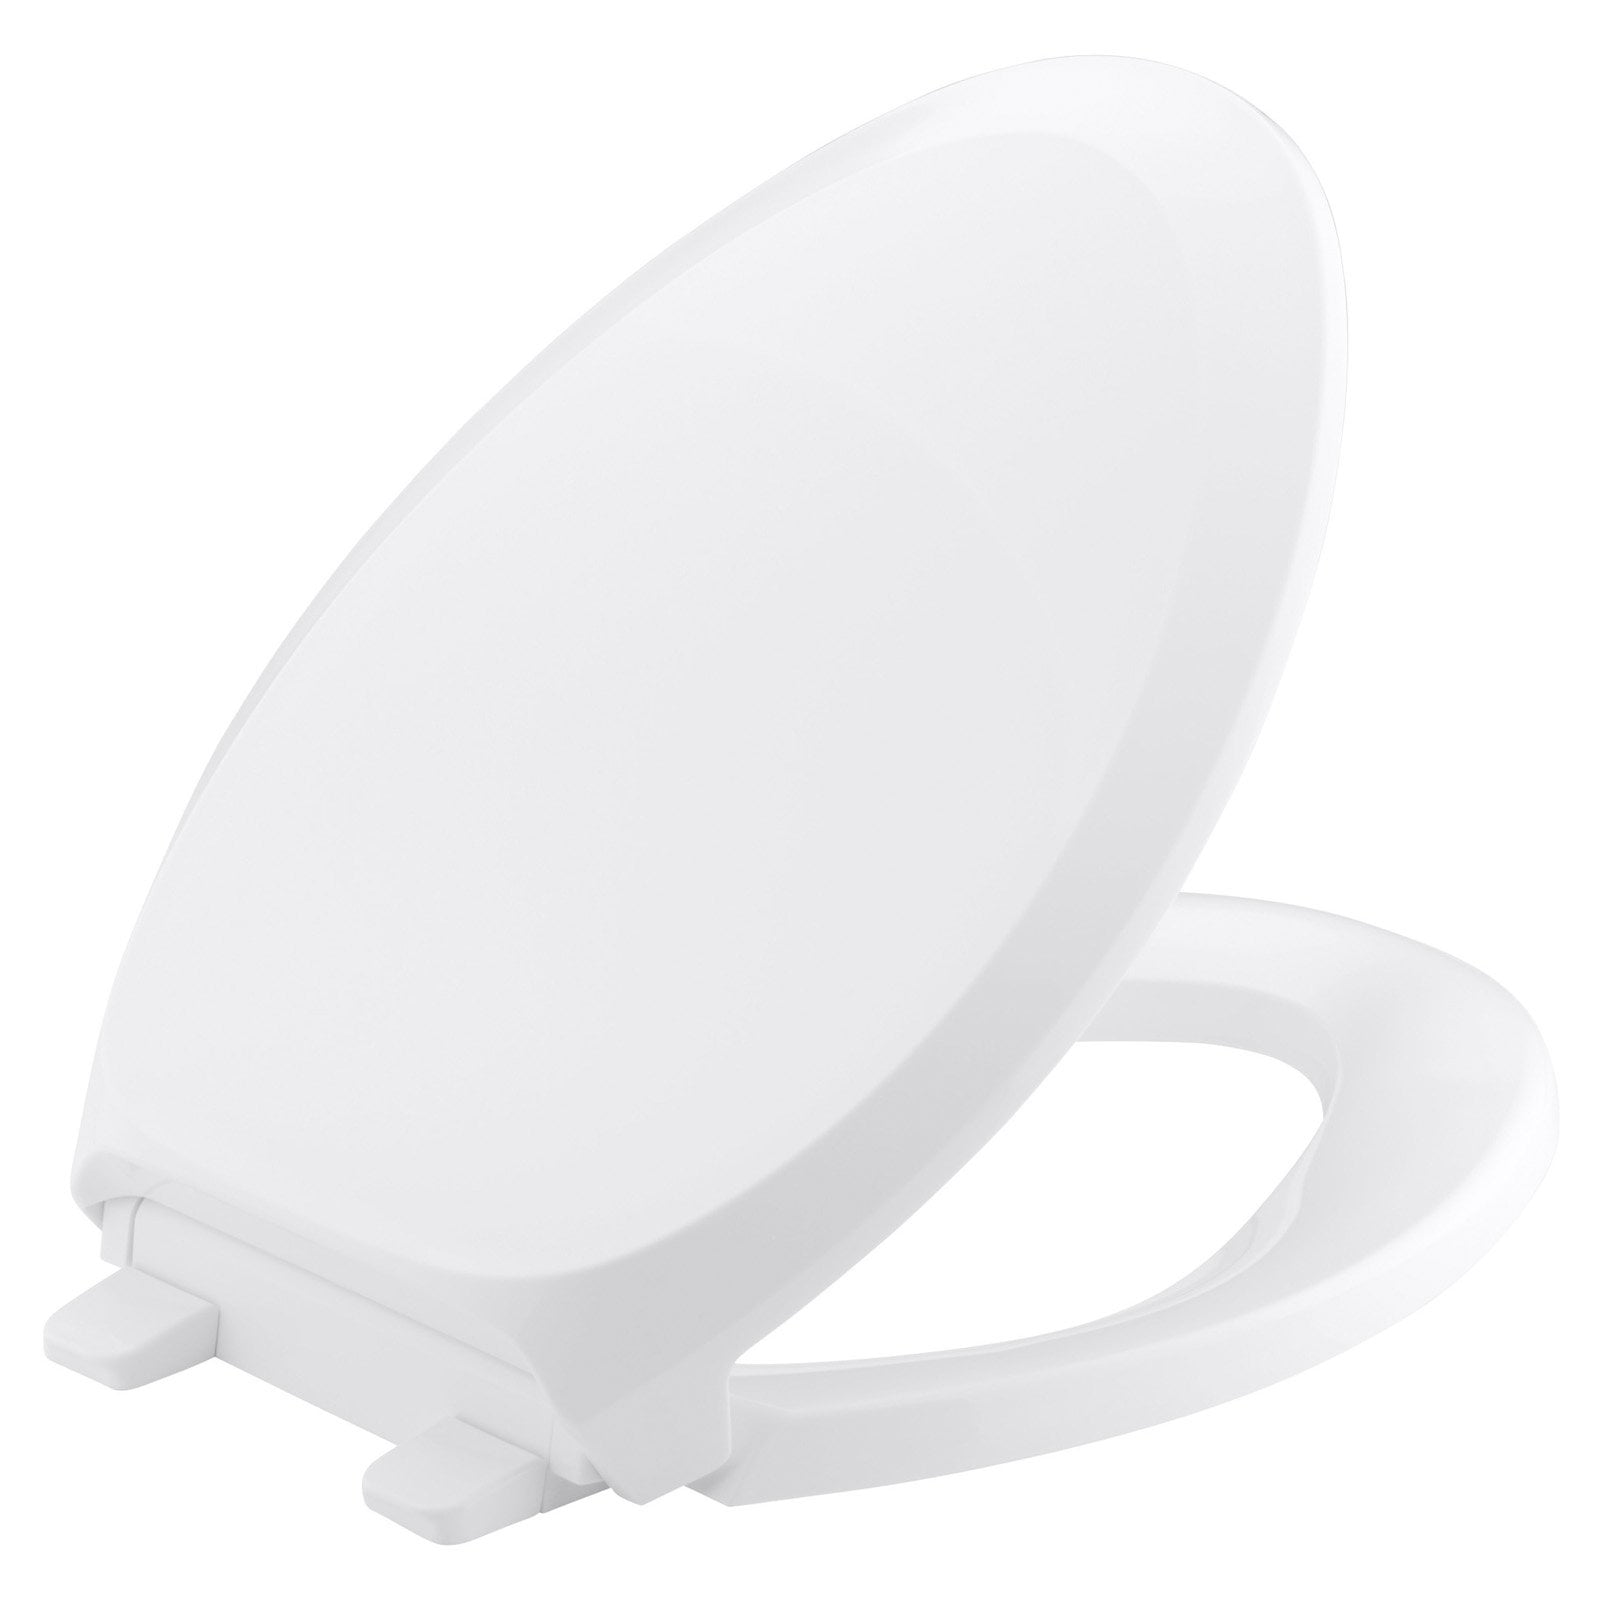 LDR 050 1020WT-SC Slow Closing Plastic Toilet Seat for Round Toilets Solid White 